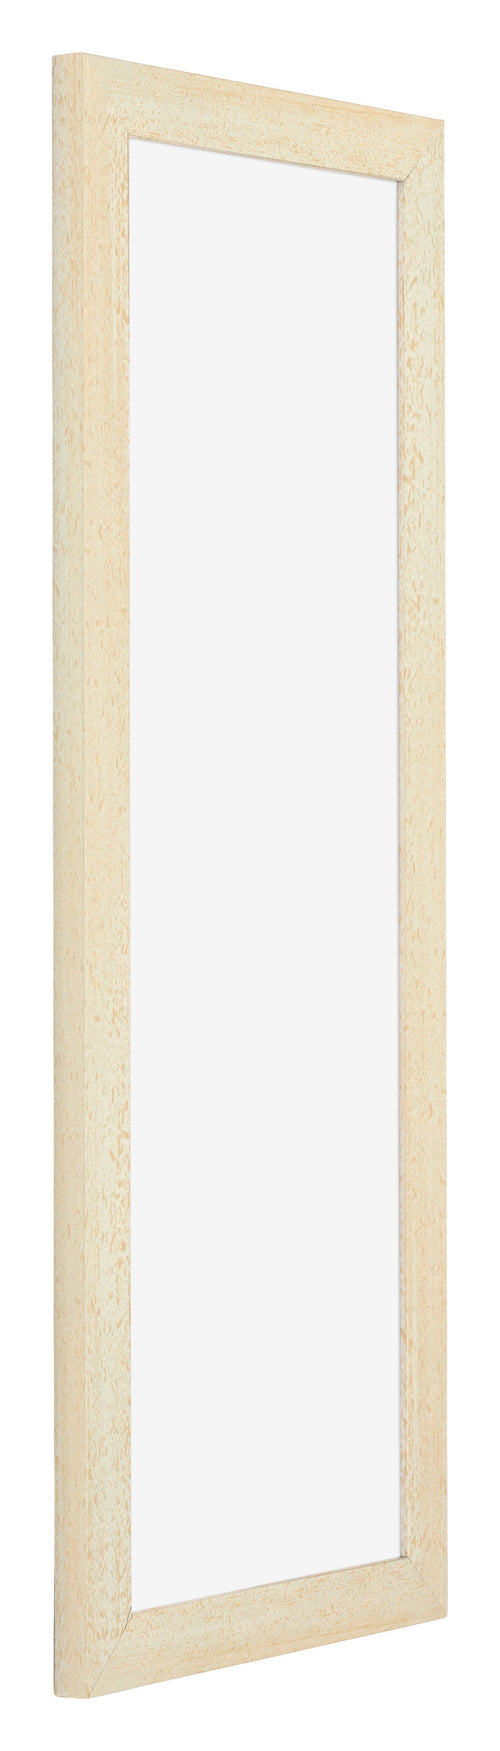 Mura MDF Photo Frame 20x60 Sand Wiped Front Oblique | Yourdecoration.com